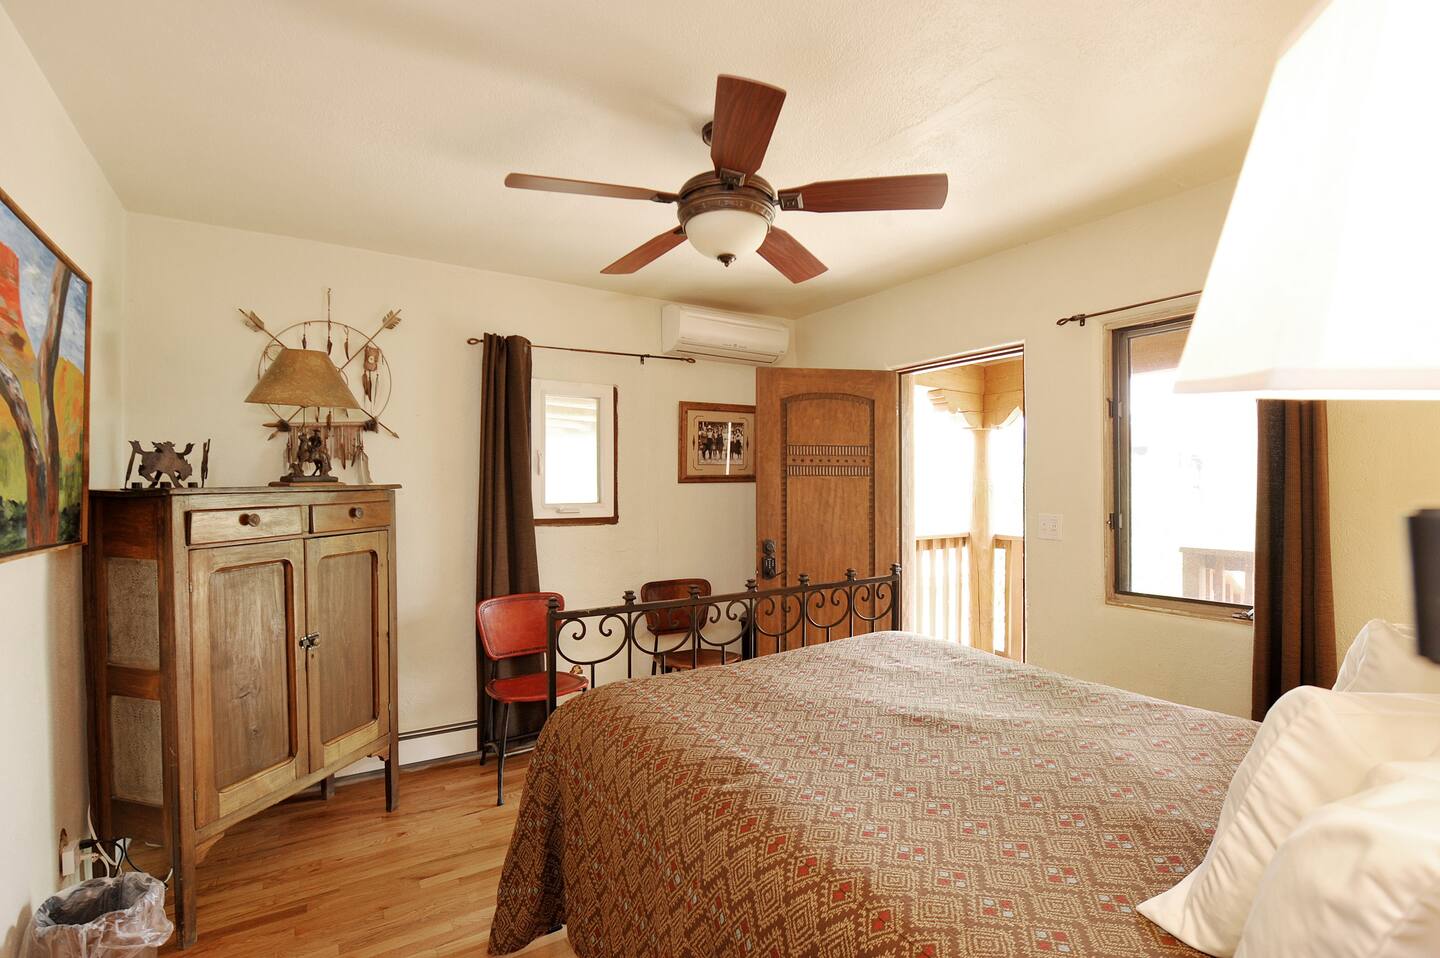 Cowgirl_Room_at_Casa_Cuma_Bed_and_Breakfast_Santa_Fe_Bed_and_Breakfast_20220624d